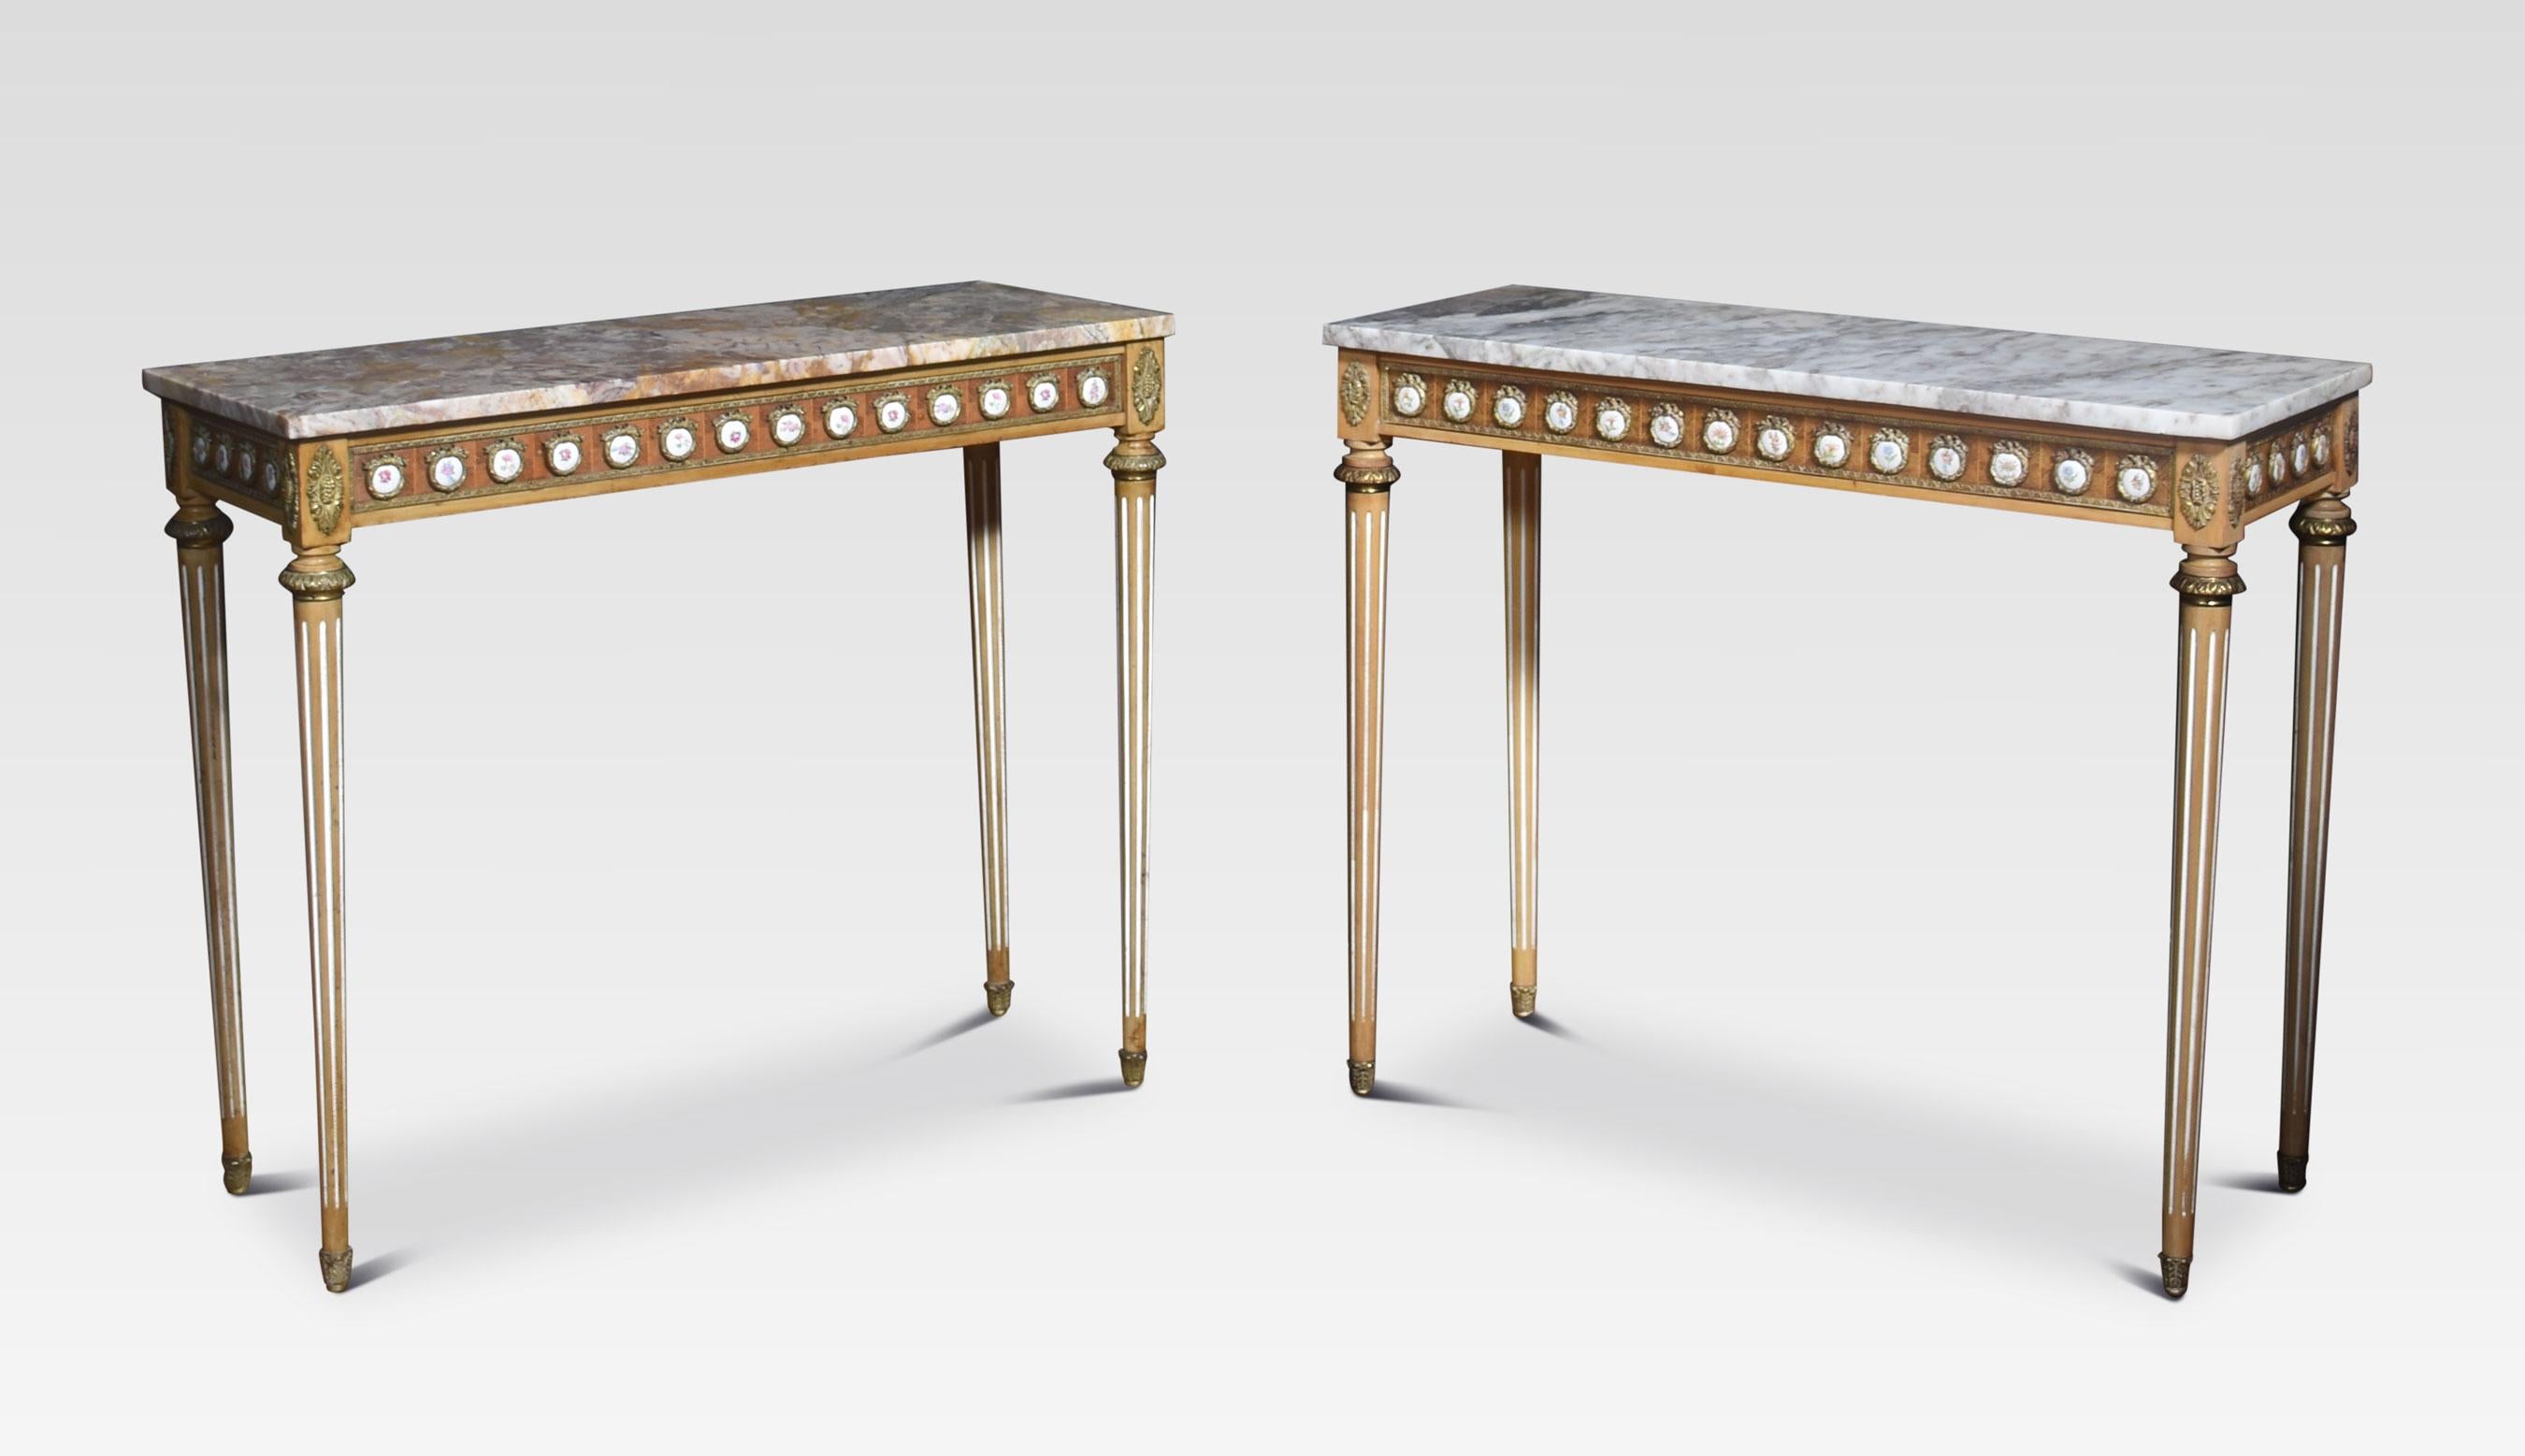 Pair of Louis XVI revival console tables by H & L Epstein, the rectangular well-figured marble top to the freeze having gilt metal mounts, and enamel plaques. Raised up on fluted tapering supports.
Dimensions
Height 31.5 Inches
Width 36.5